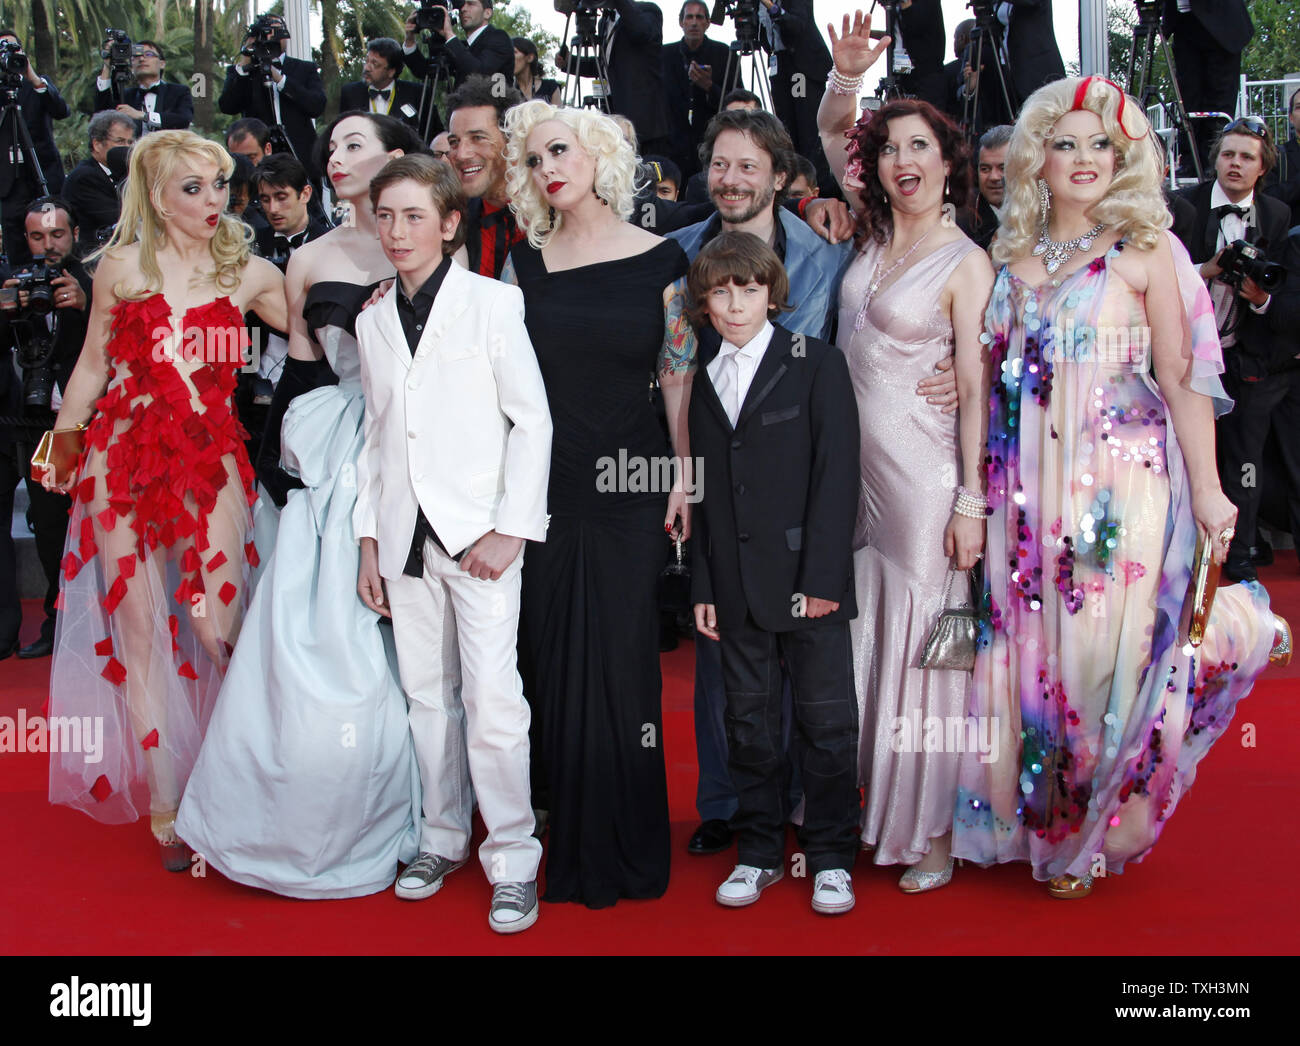 The cast of the film 'Tournee', including Mimi Le Meaux, Dirty Martini, Mathieu Amalric, Julie Atlas Muz, Kitten on the Keys, Roky Roulette and Evie Lovelle, arrives on the red carpet before the screening of their film during the 63rd annual Cannes International Film Festival in Cannes, France on May 13, 2010.  UPI/David Silpa Stock Photo